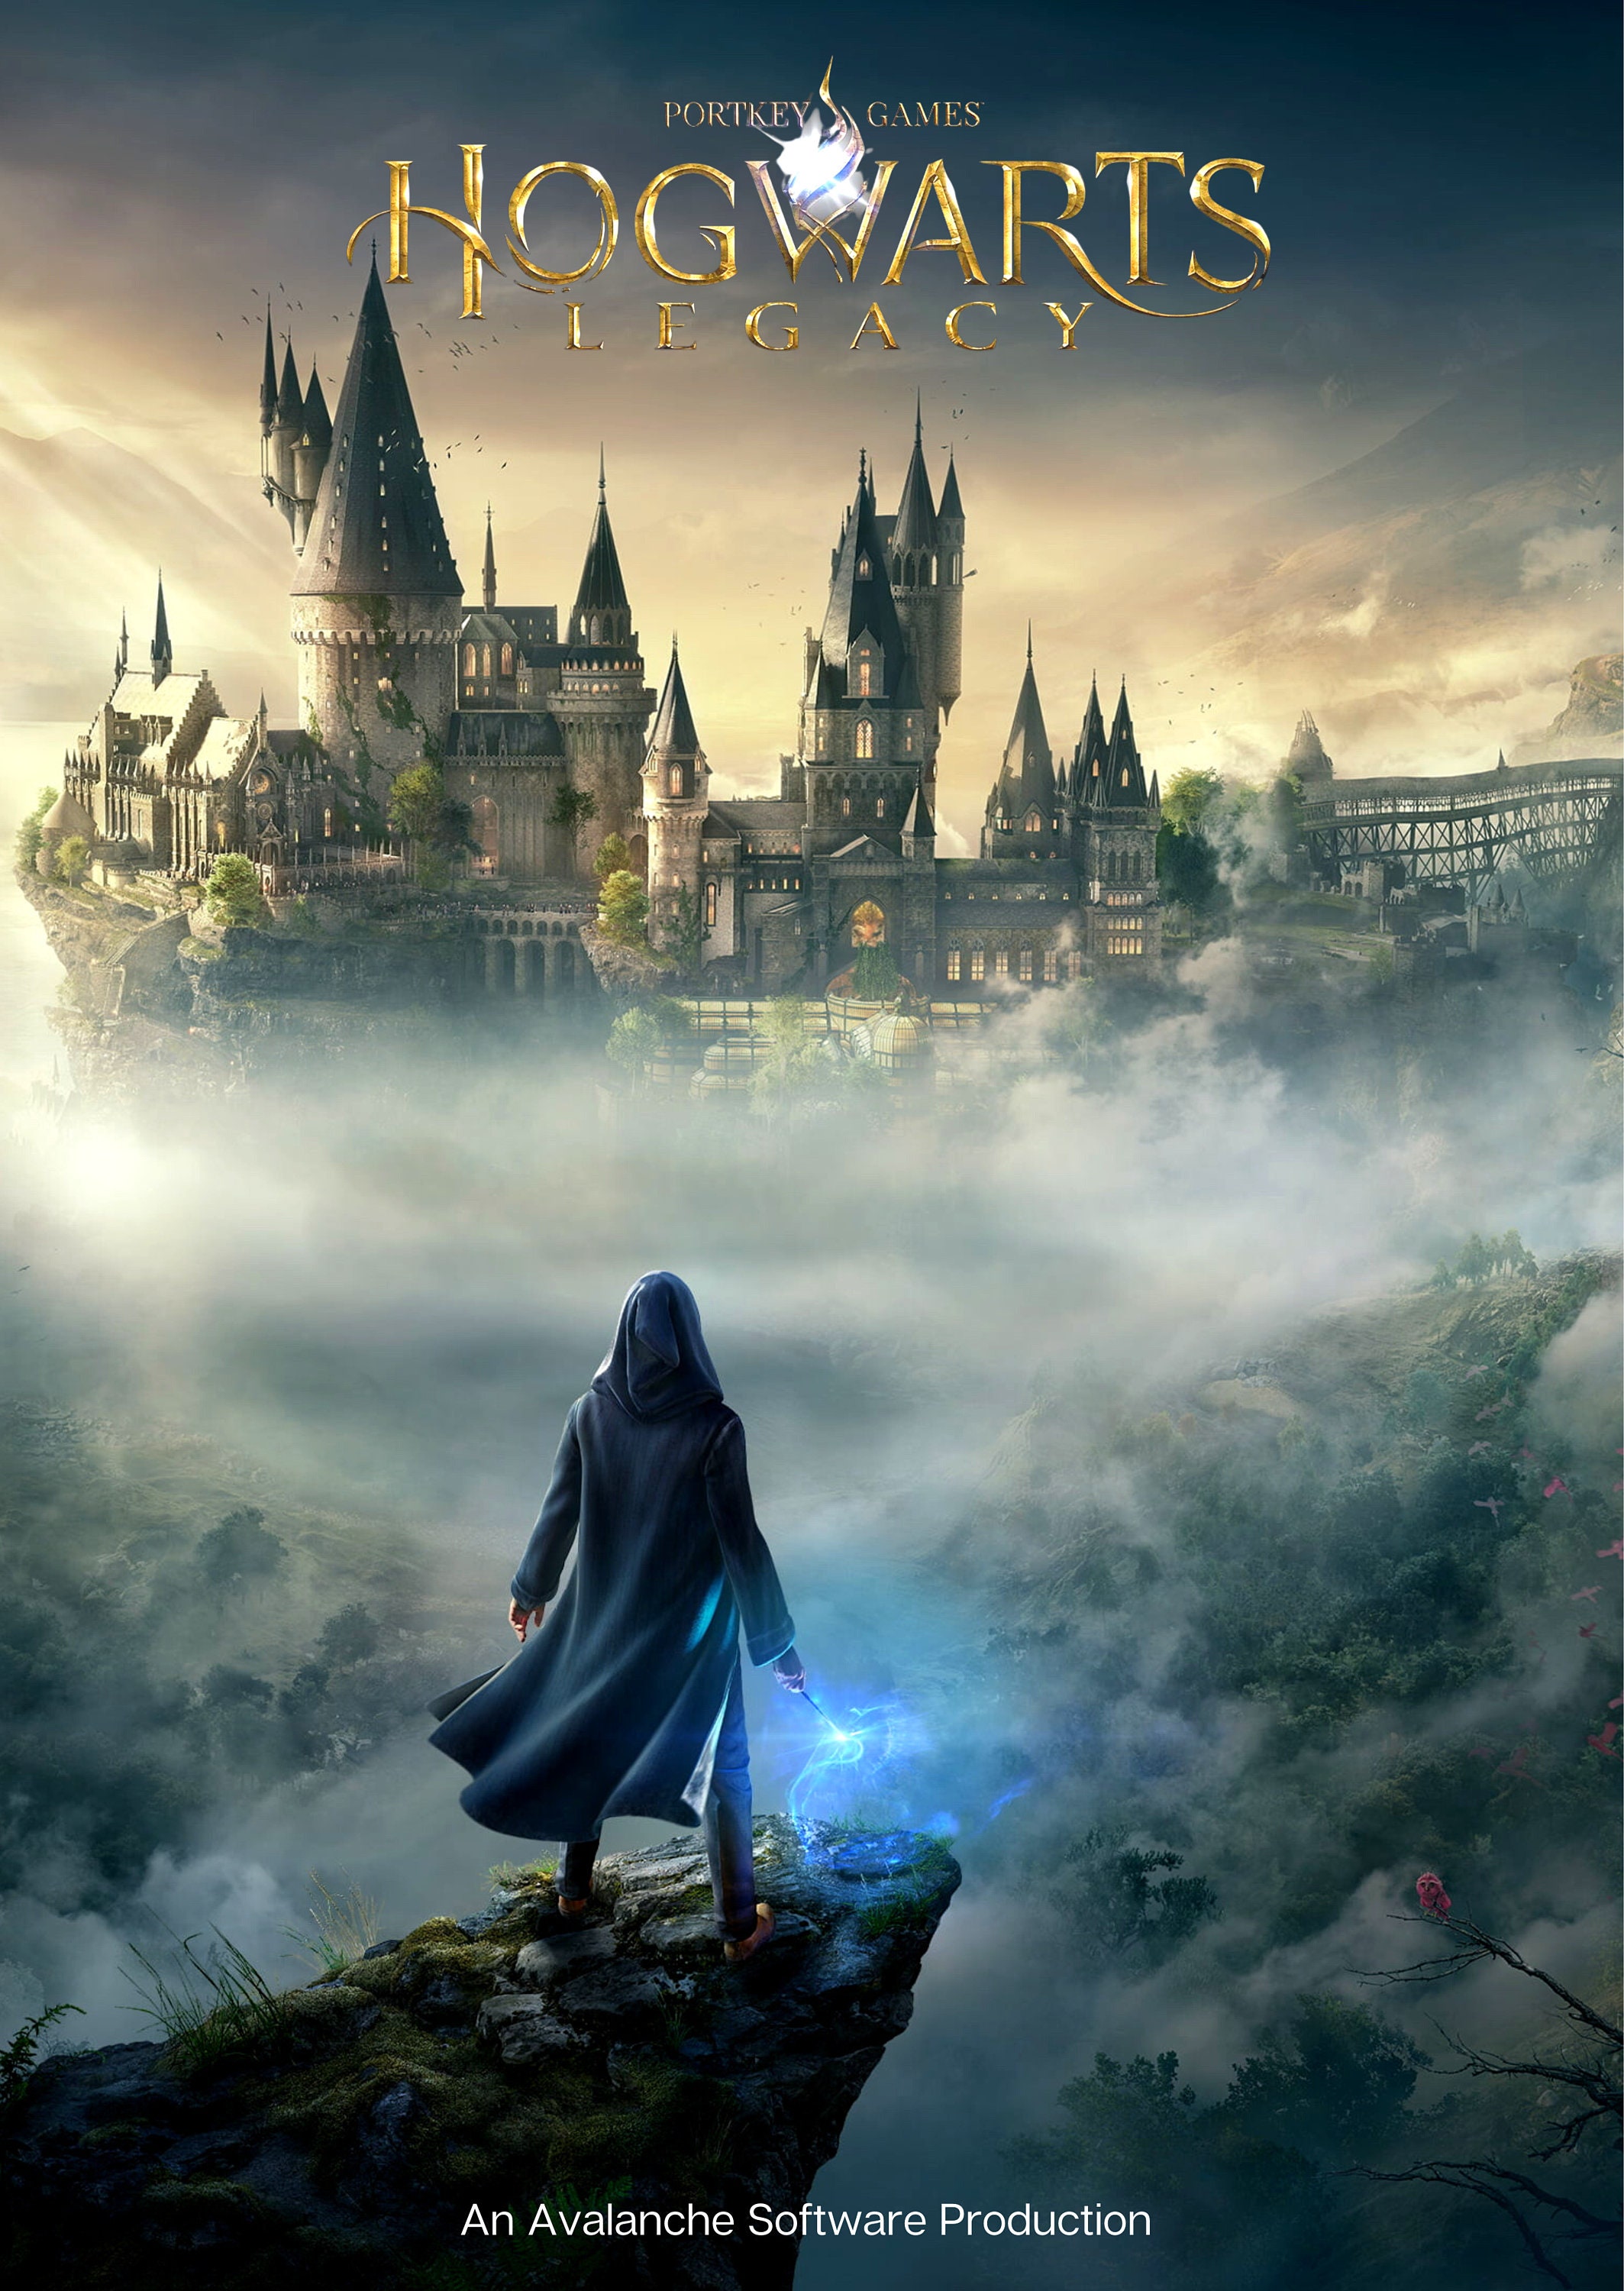 Poster Harry Potter - Hogwarts Legacy, Wall Art, Gifts & Merchandise